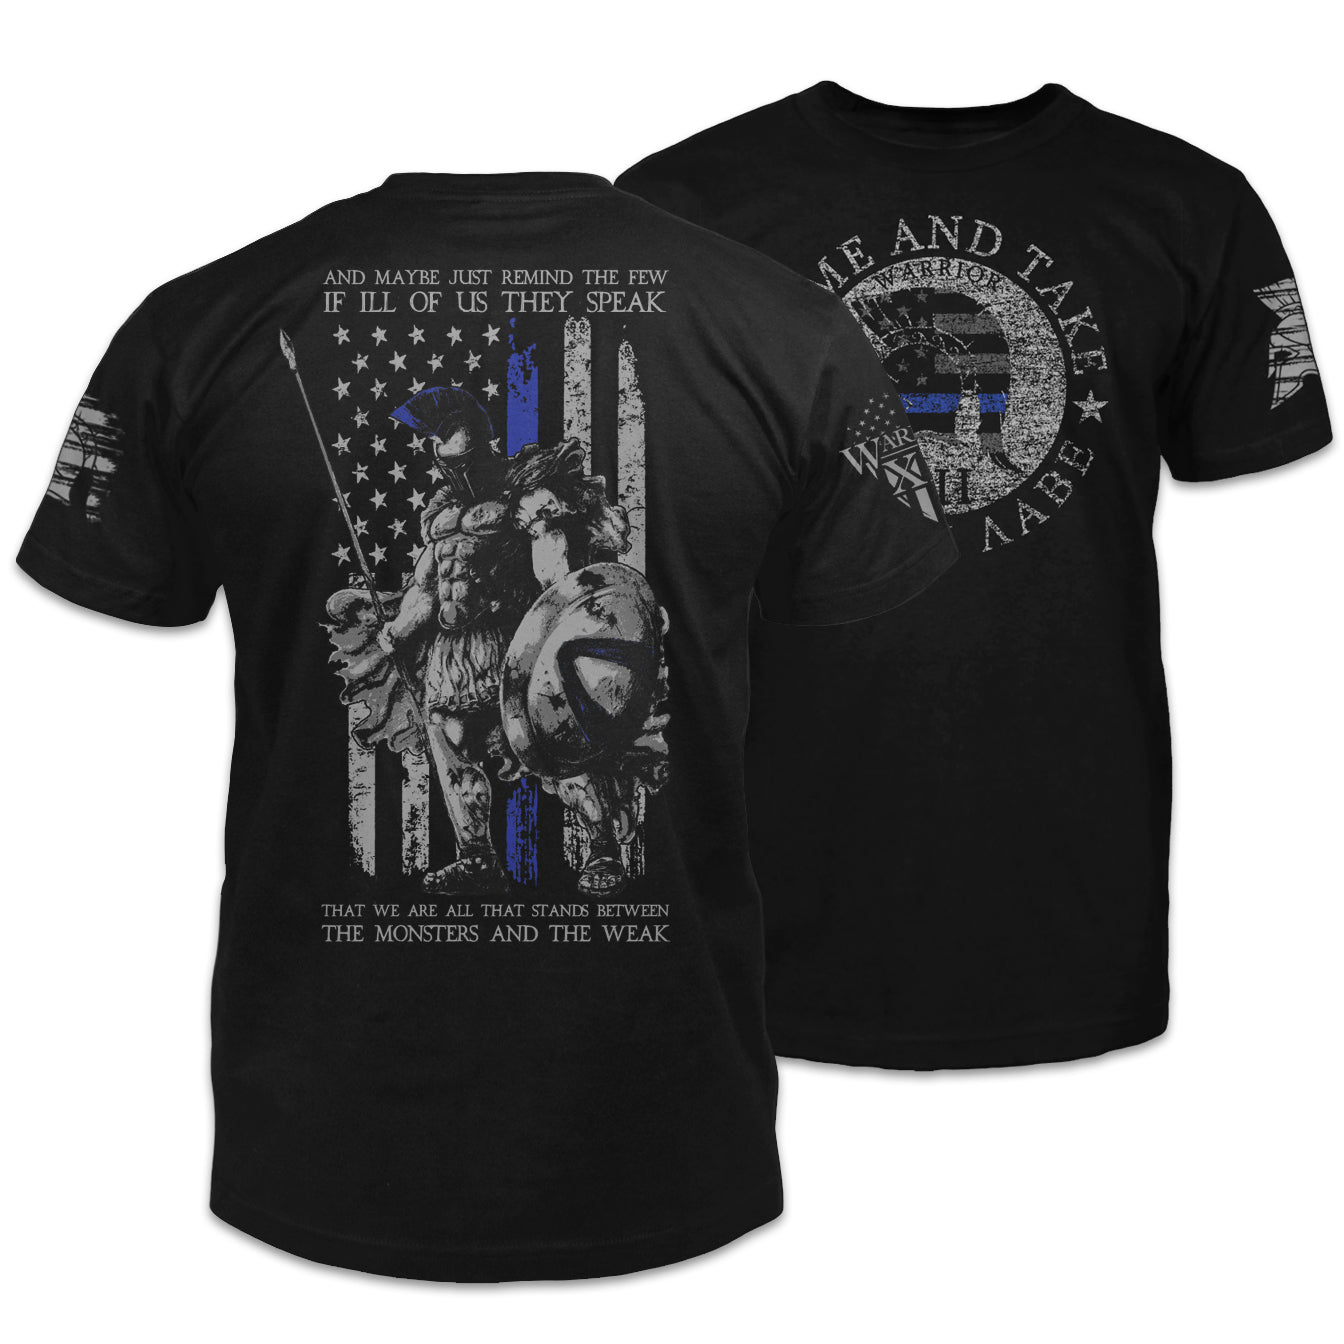 Front & back black t-shirt with an "American Spartan" thin blue line printed on the shirt.